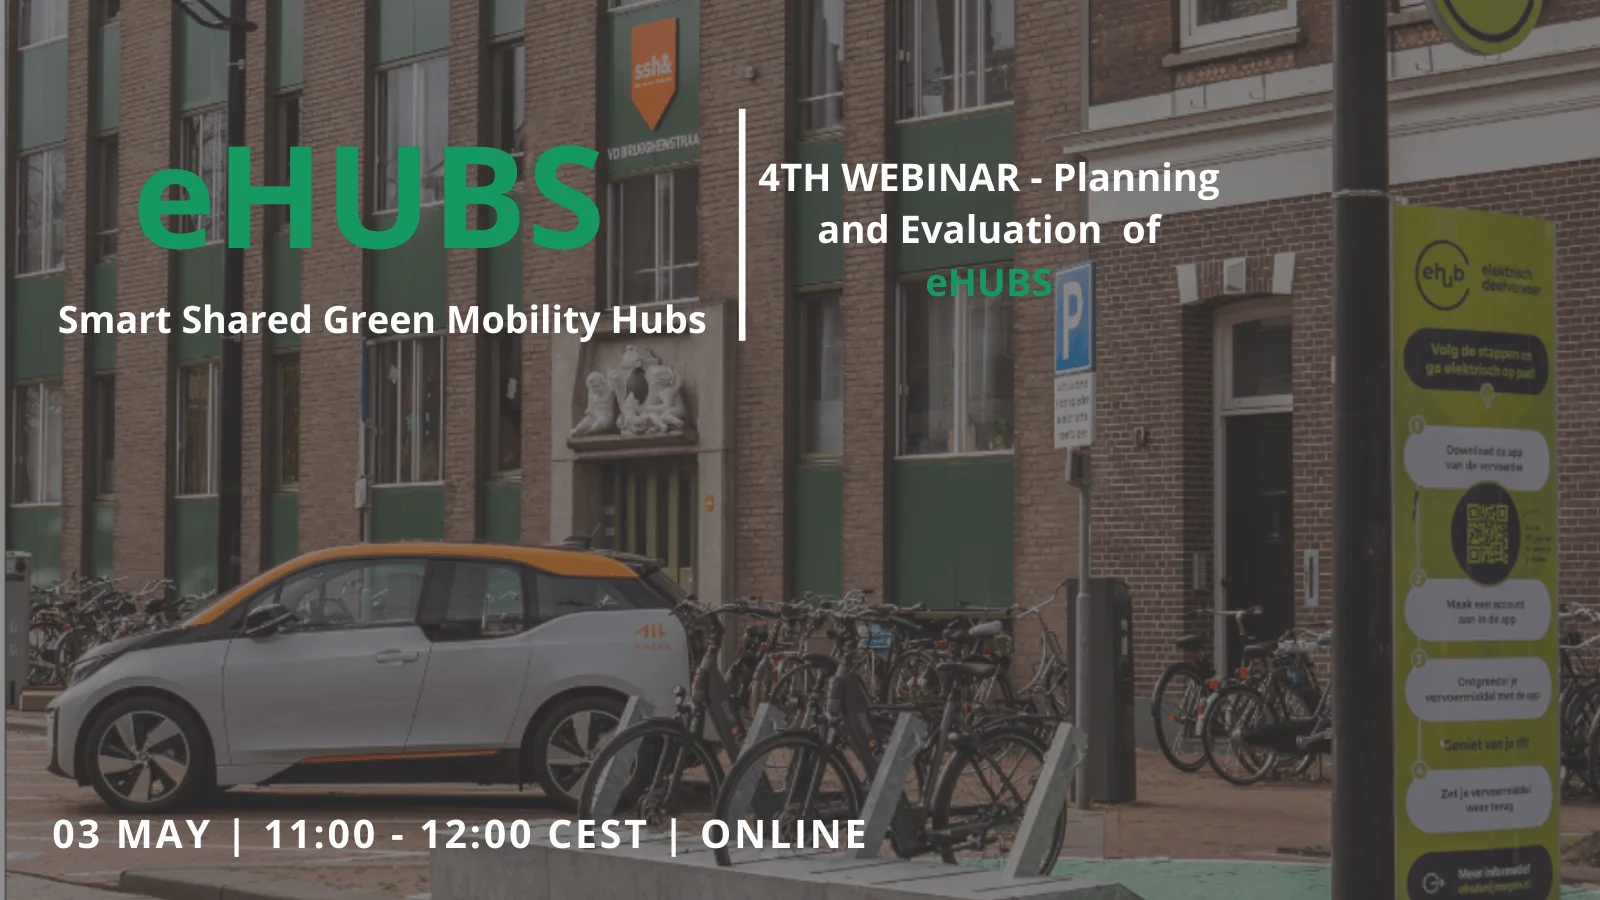 eHUBS 4th webinar: Planning and evaluation of eHUBS